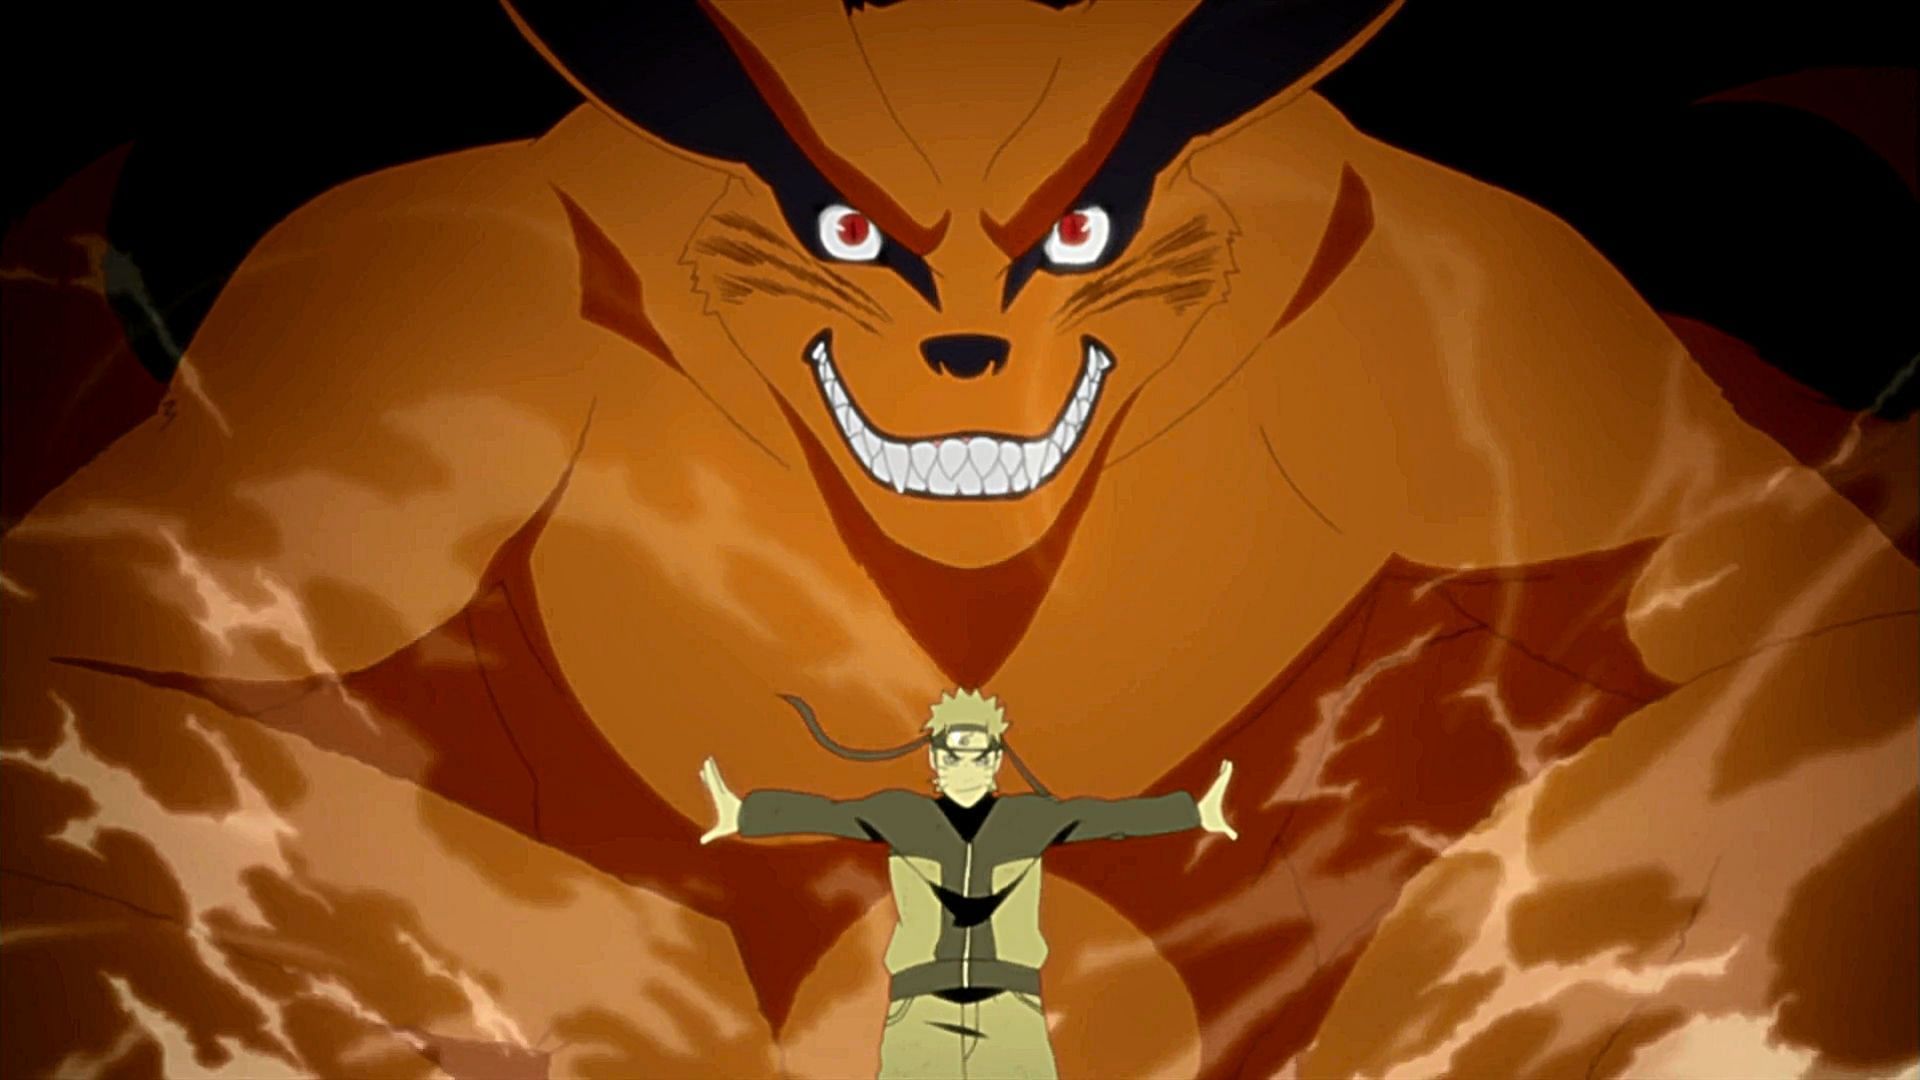 Naruto (front) and Kurama (back) as seen in the anime series (Image via Pierrot)